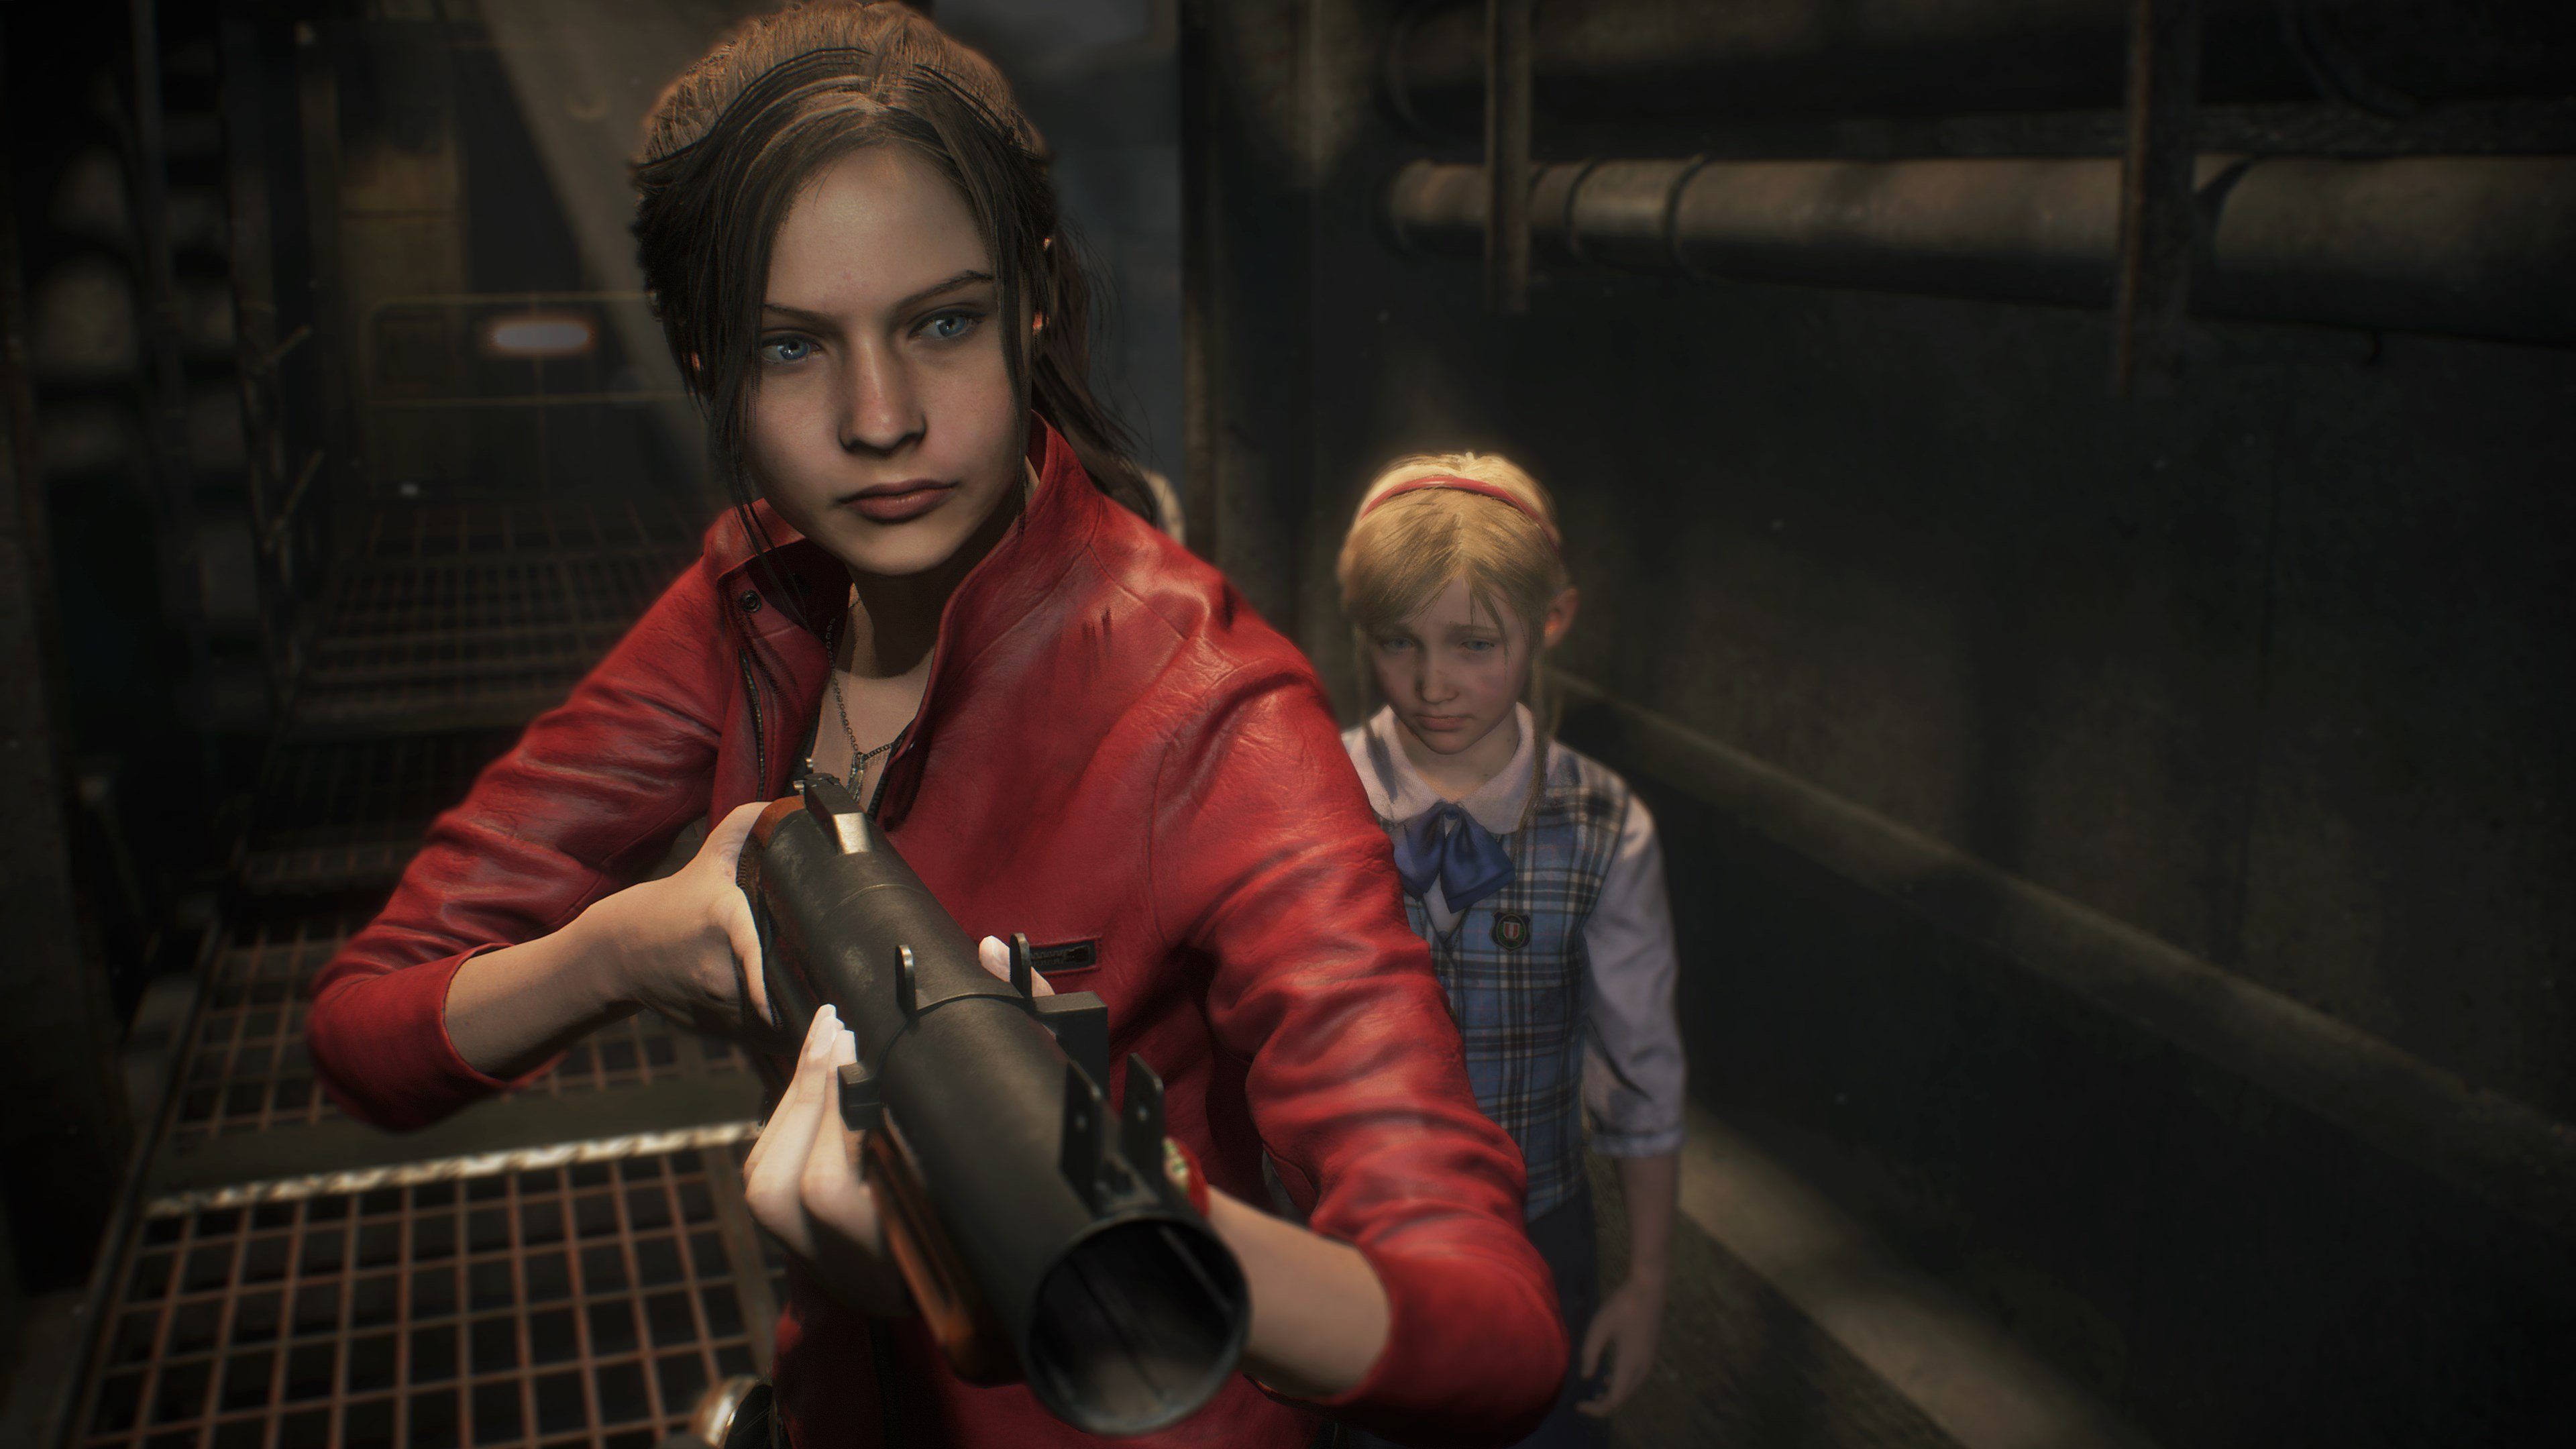 Capcom drops slew of images of Resident Evil 2 remake co-lead, Claire Redfield